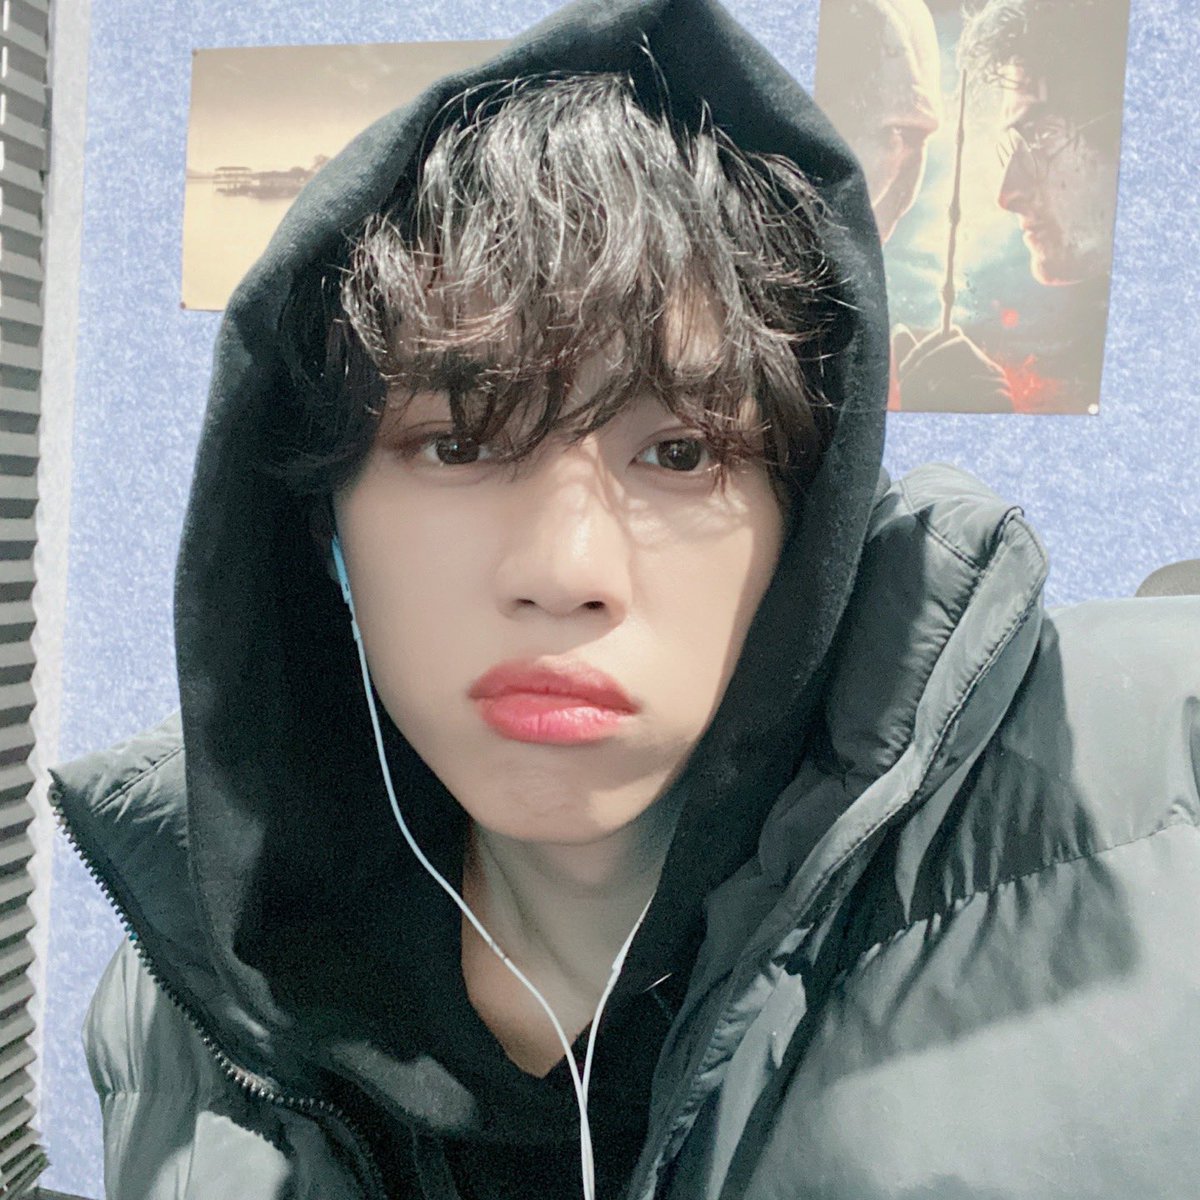 I love you. Some people would ask me;"Why do you love TBZ?""Why do you love Kim Sunwoo?"Tbh, idk why. I can't put into words the reason why. But I just love you so much that I wanna give all the things you deserve in this world ♡